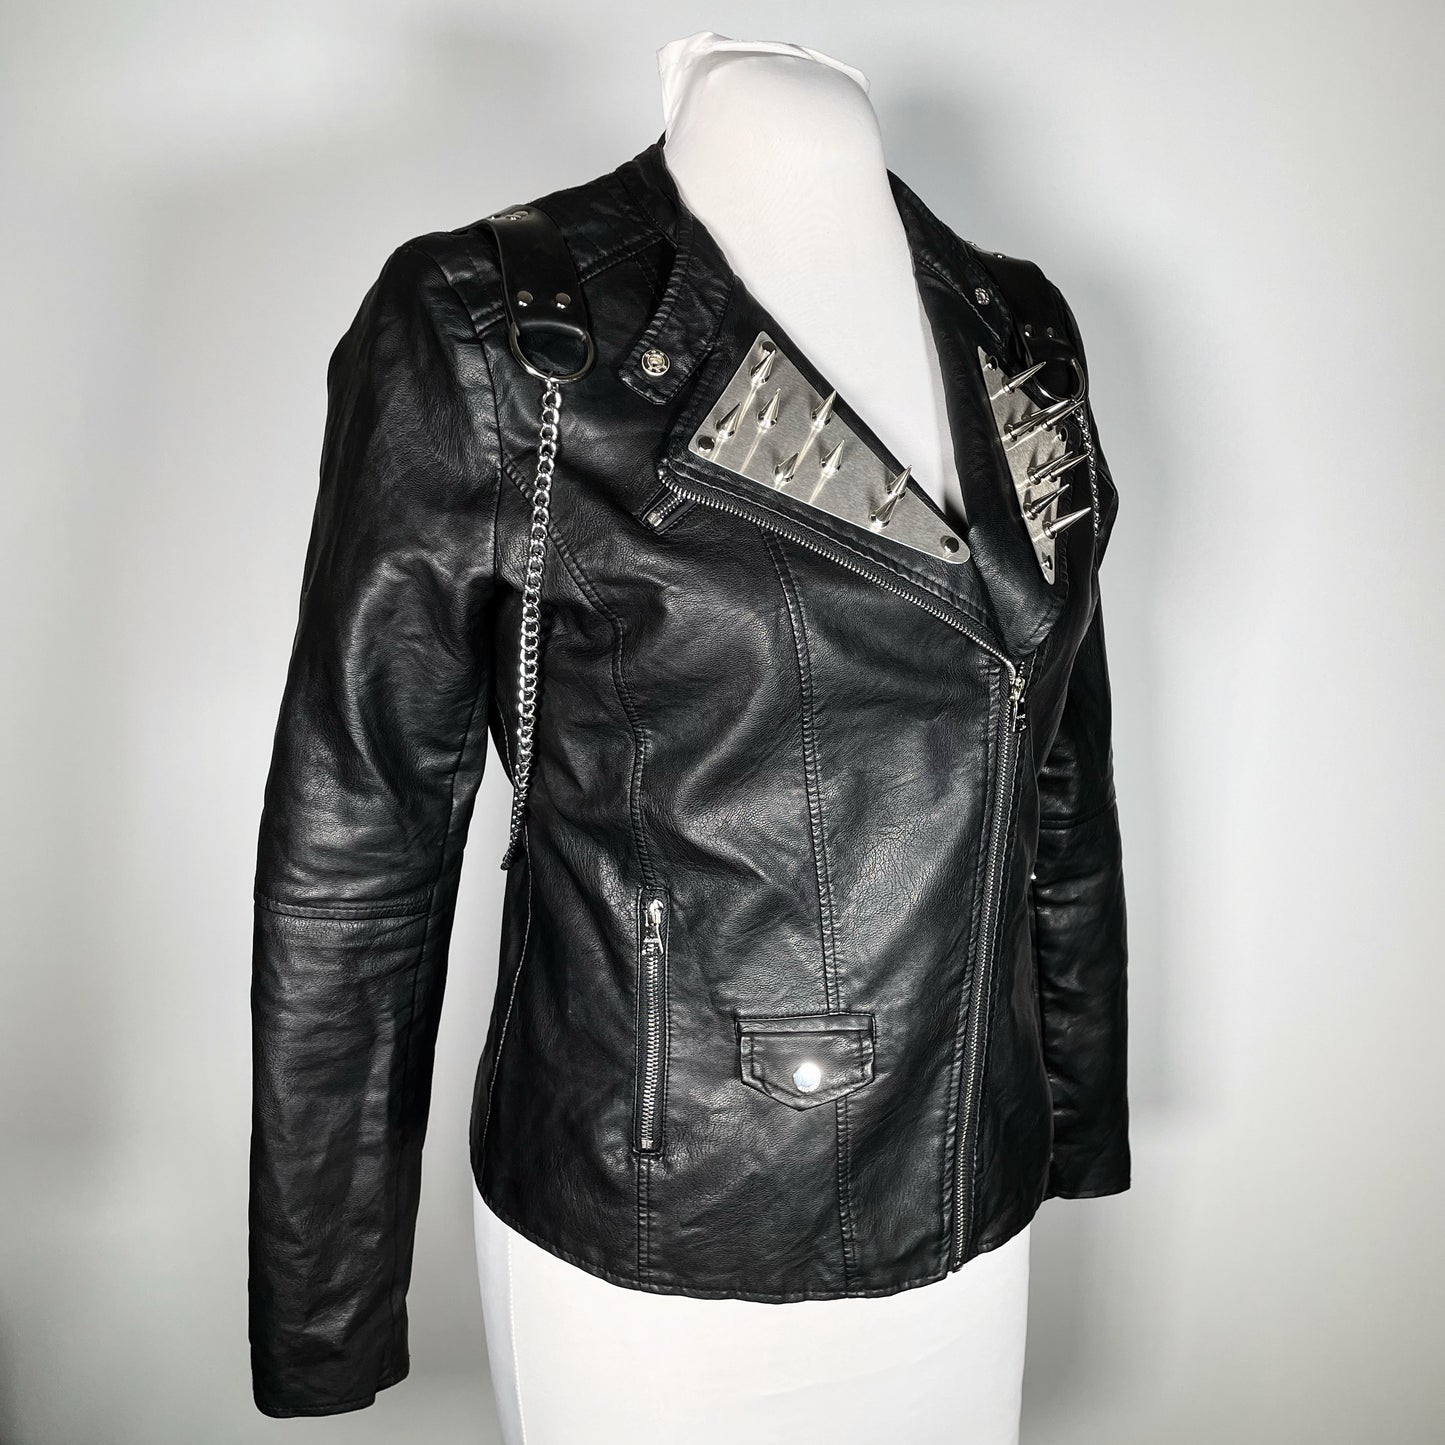 Black Pleather Moto Jacket with Metal Plating and Spikes and Harness back